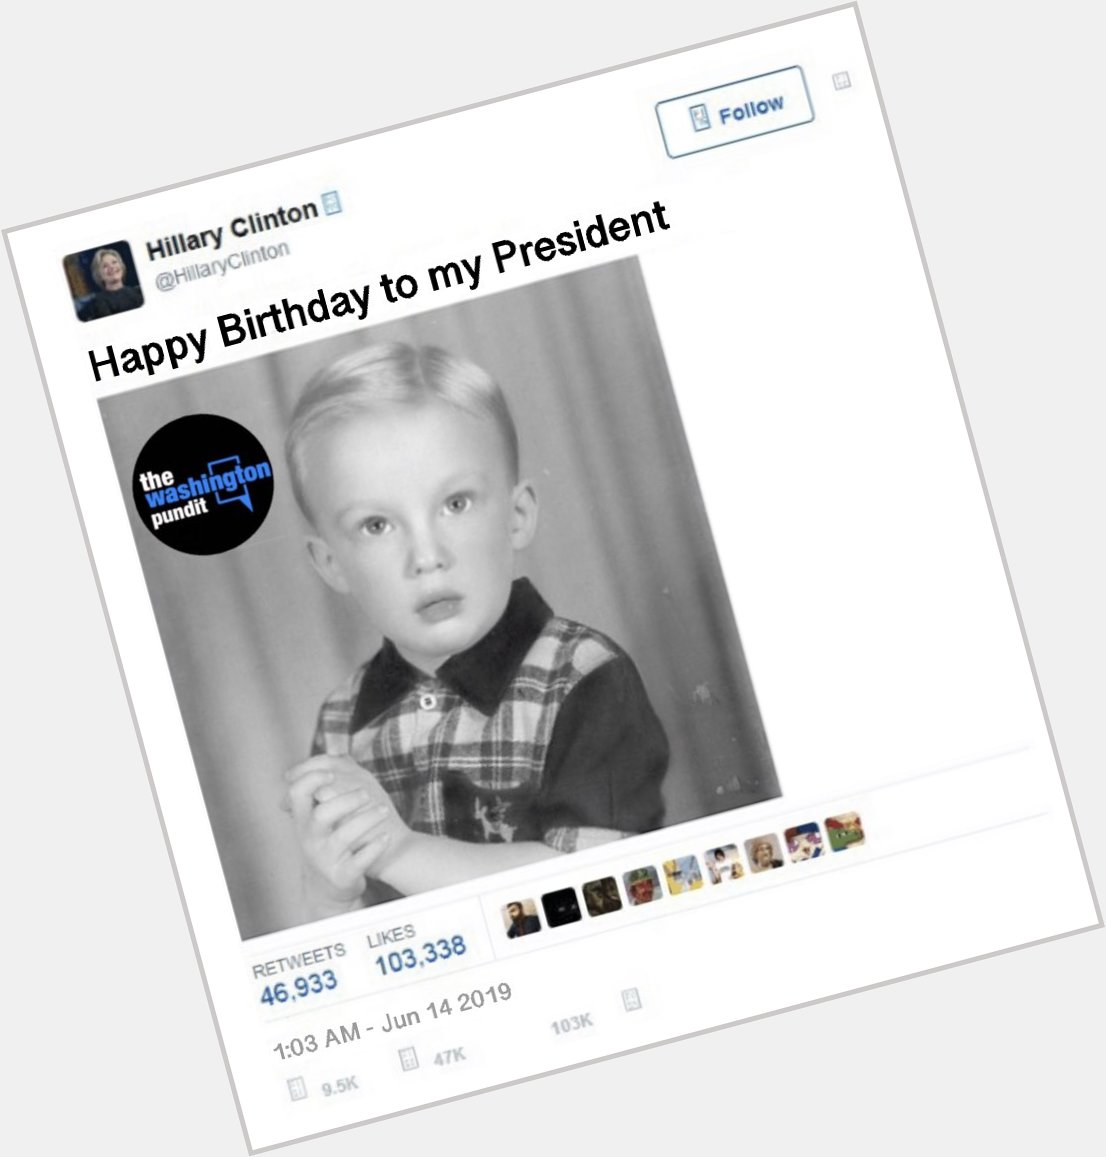 Let s all join Hillary Clinton and wish Donald Trump a Happy Birthday!!! 